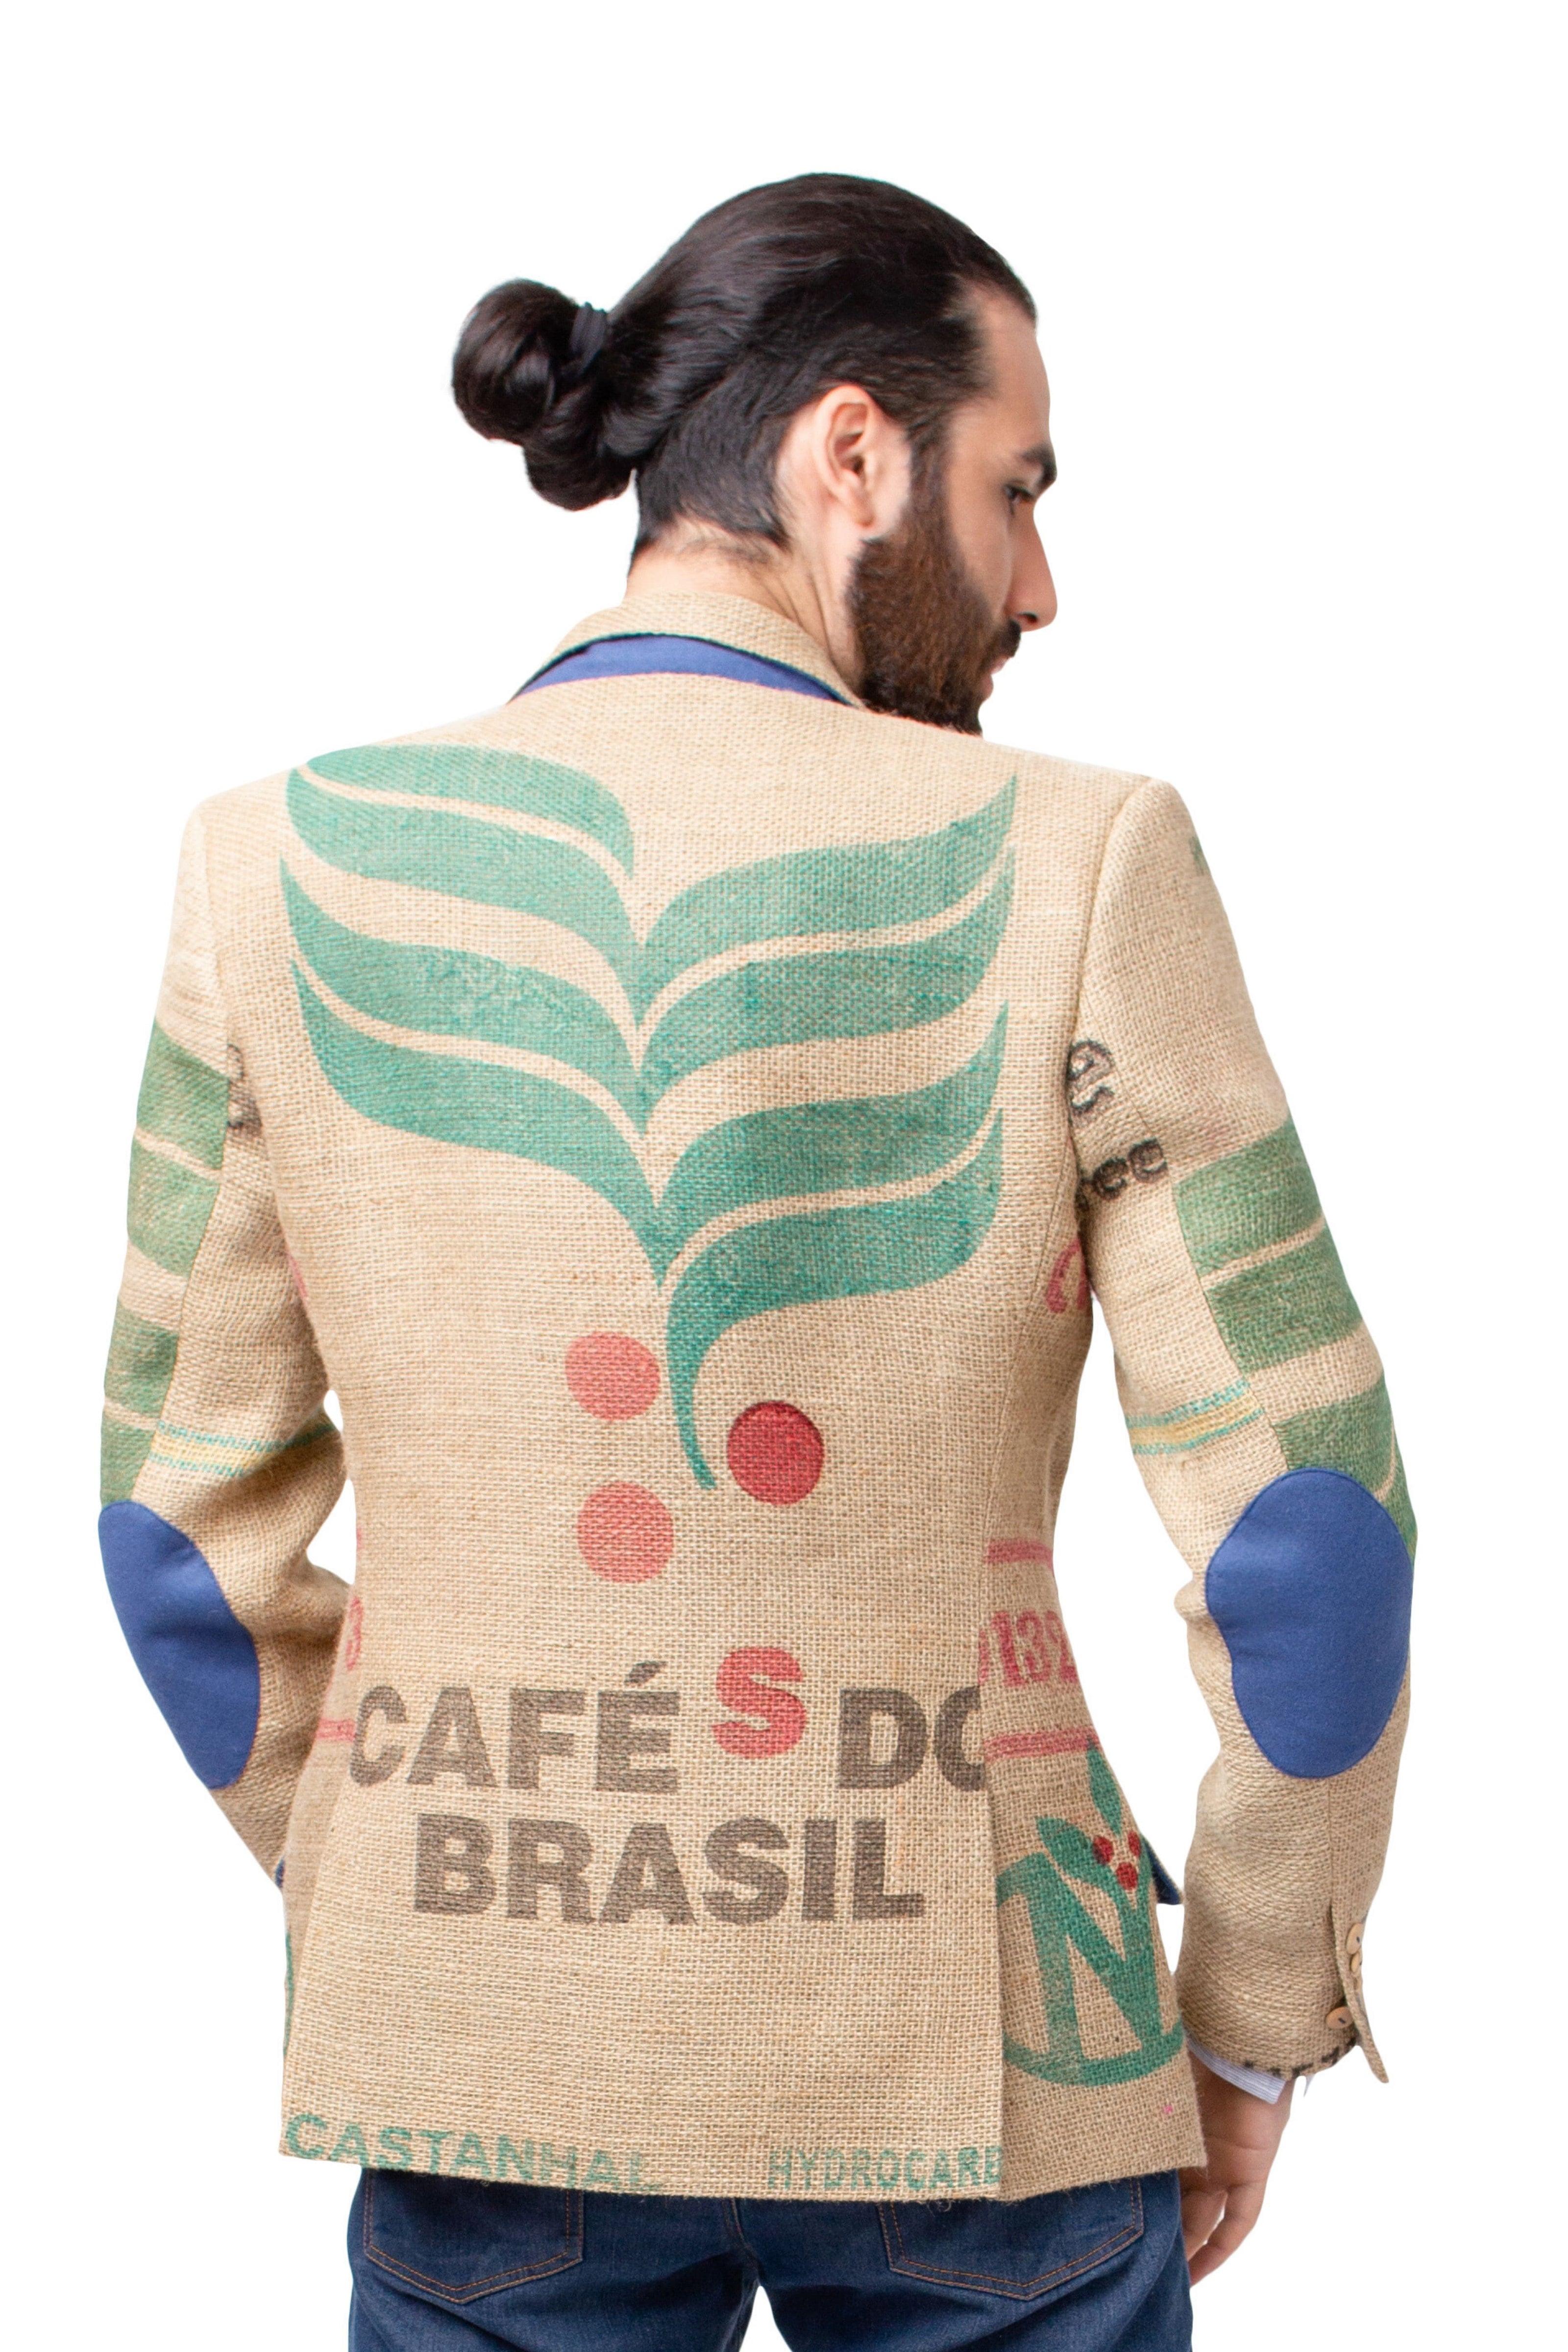 Sustainable luxury fashion piece for men made from Brazilian coffee sacks